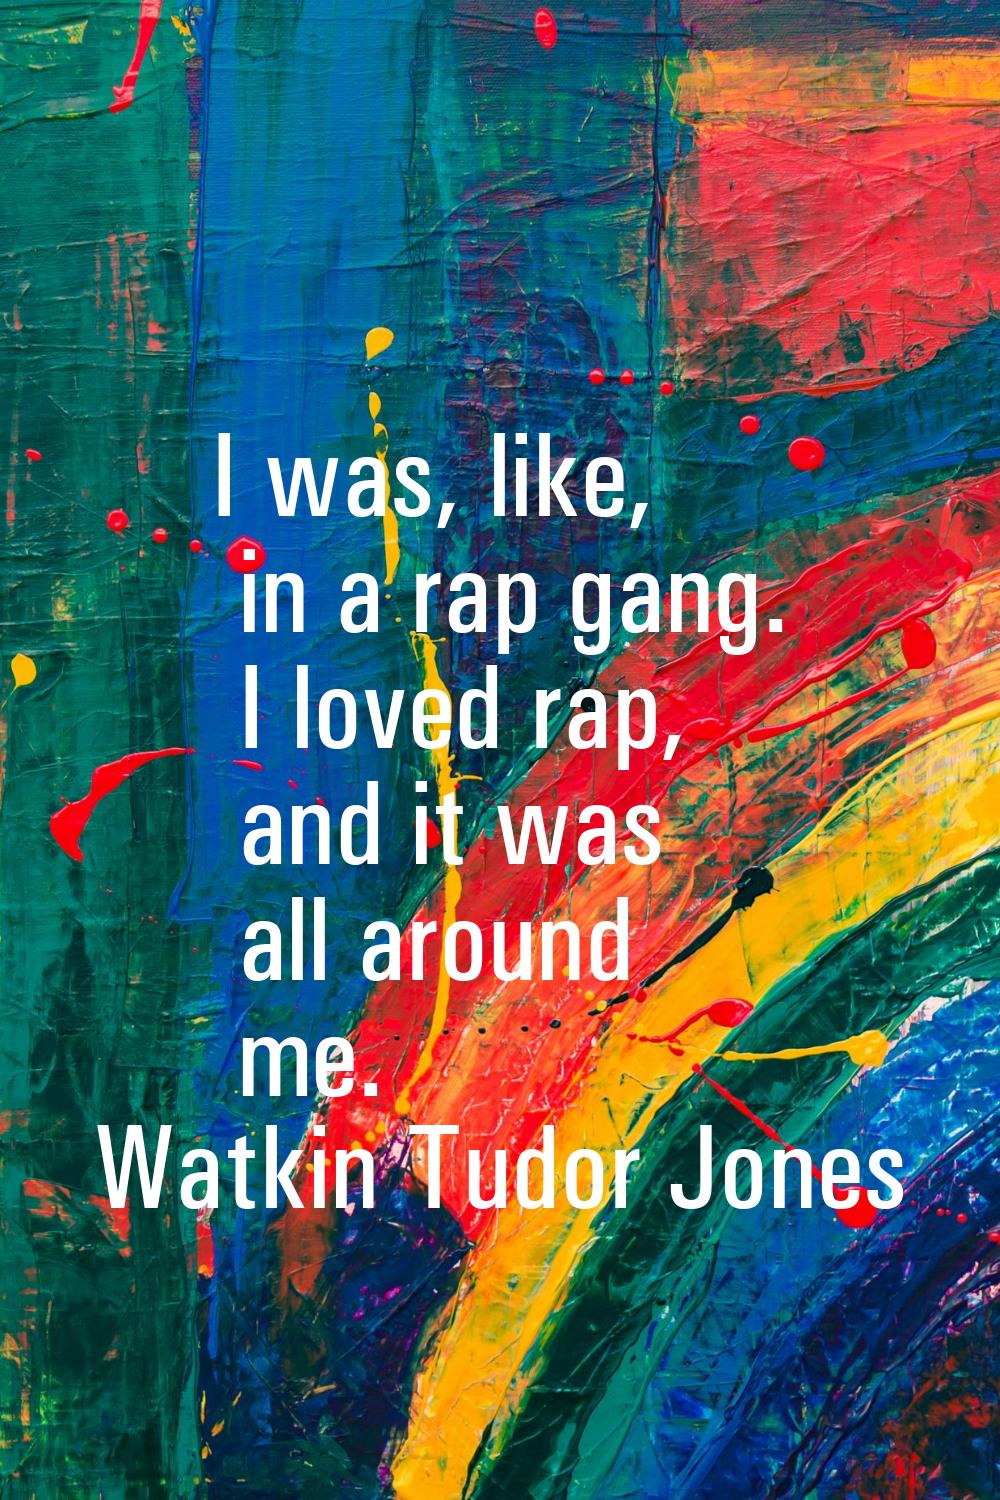 I was, like, in a rap gang. I loved rap, and it was all around me.